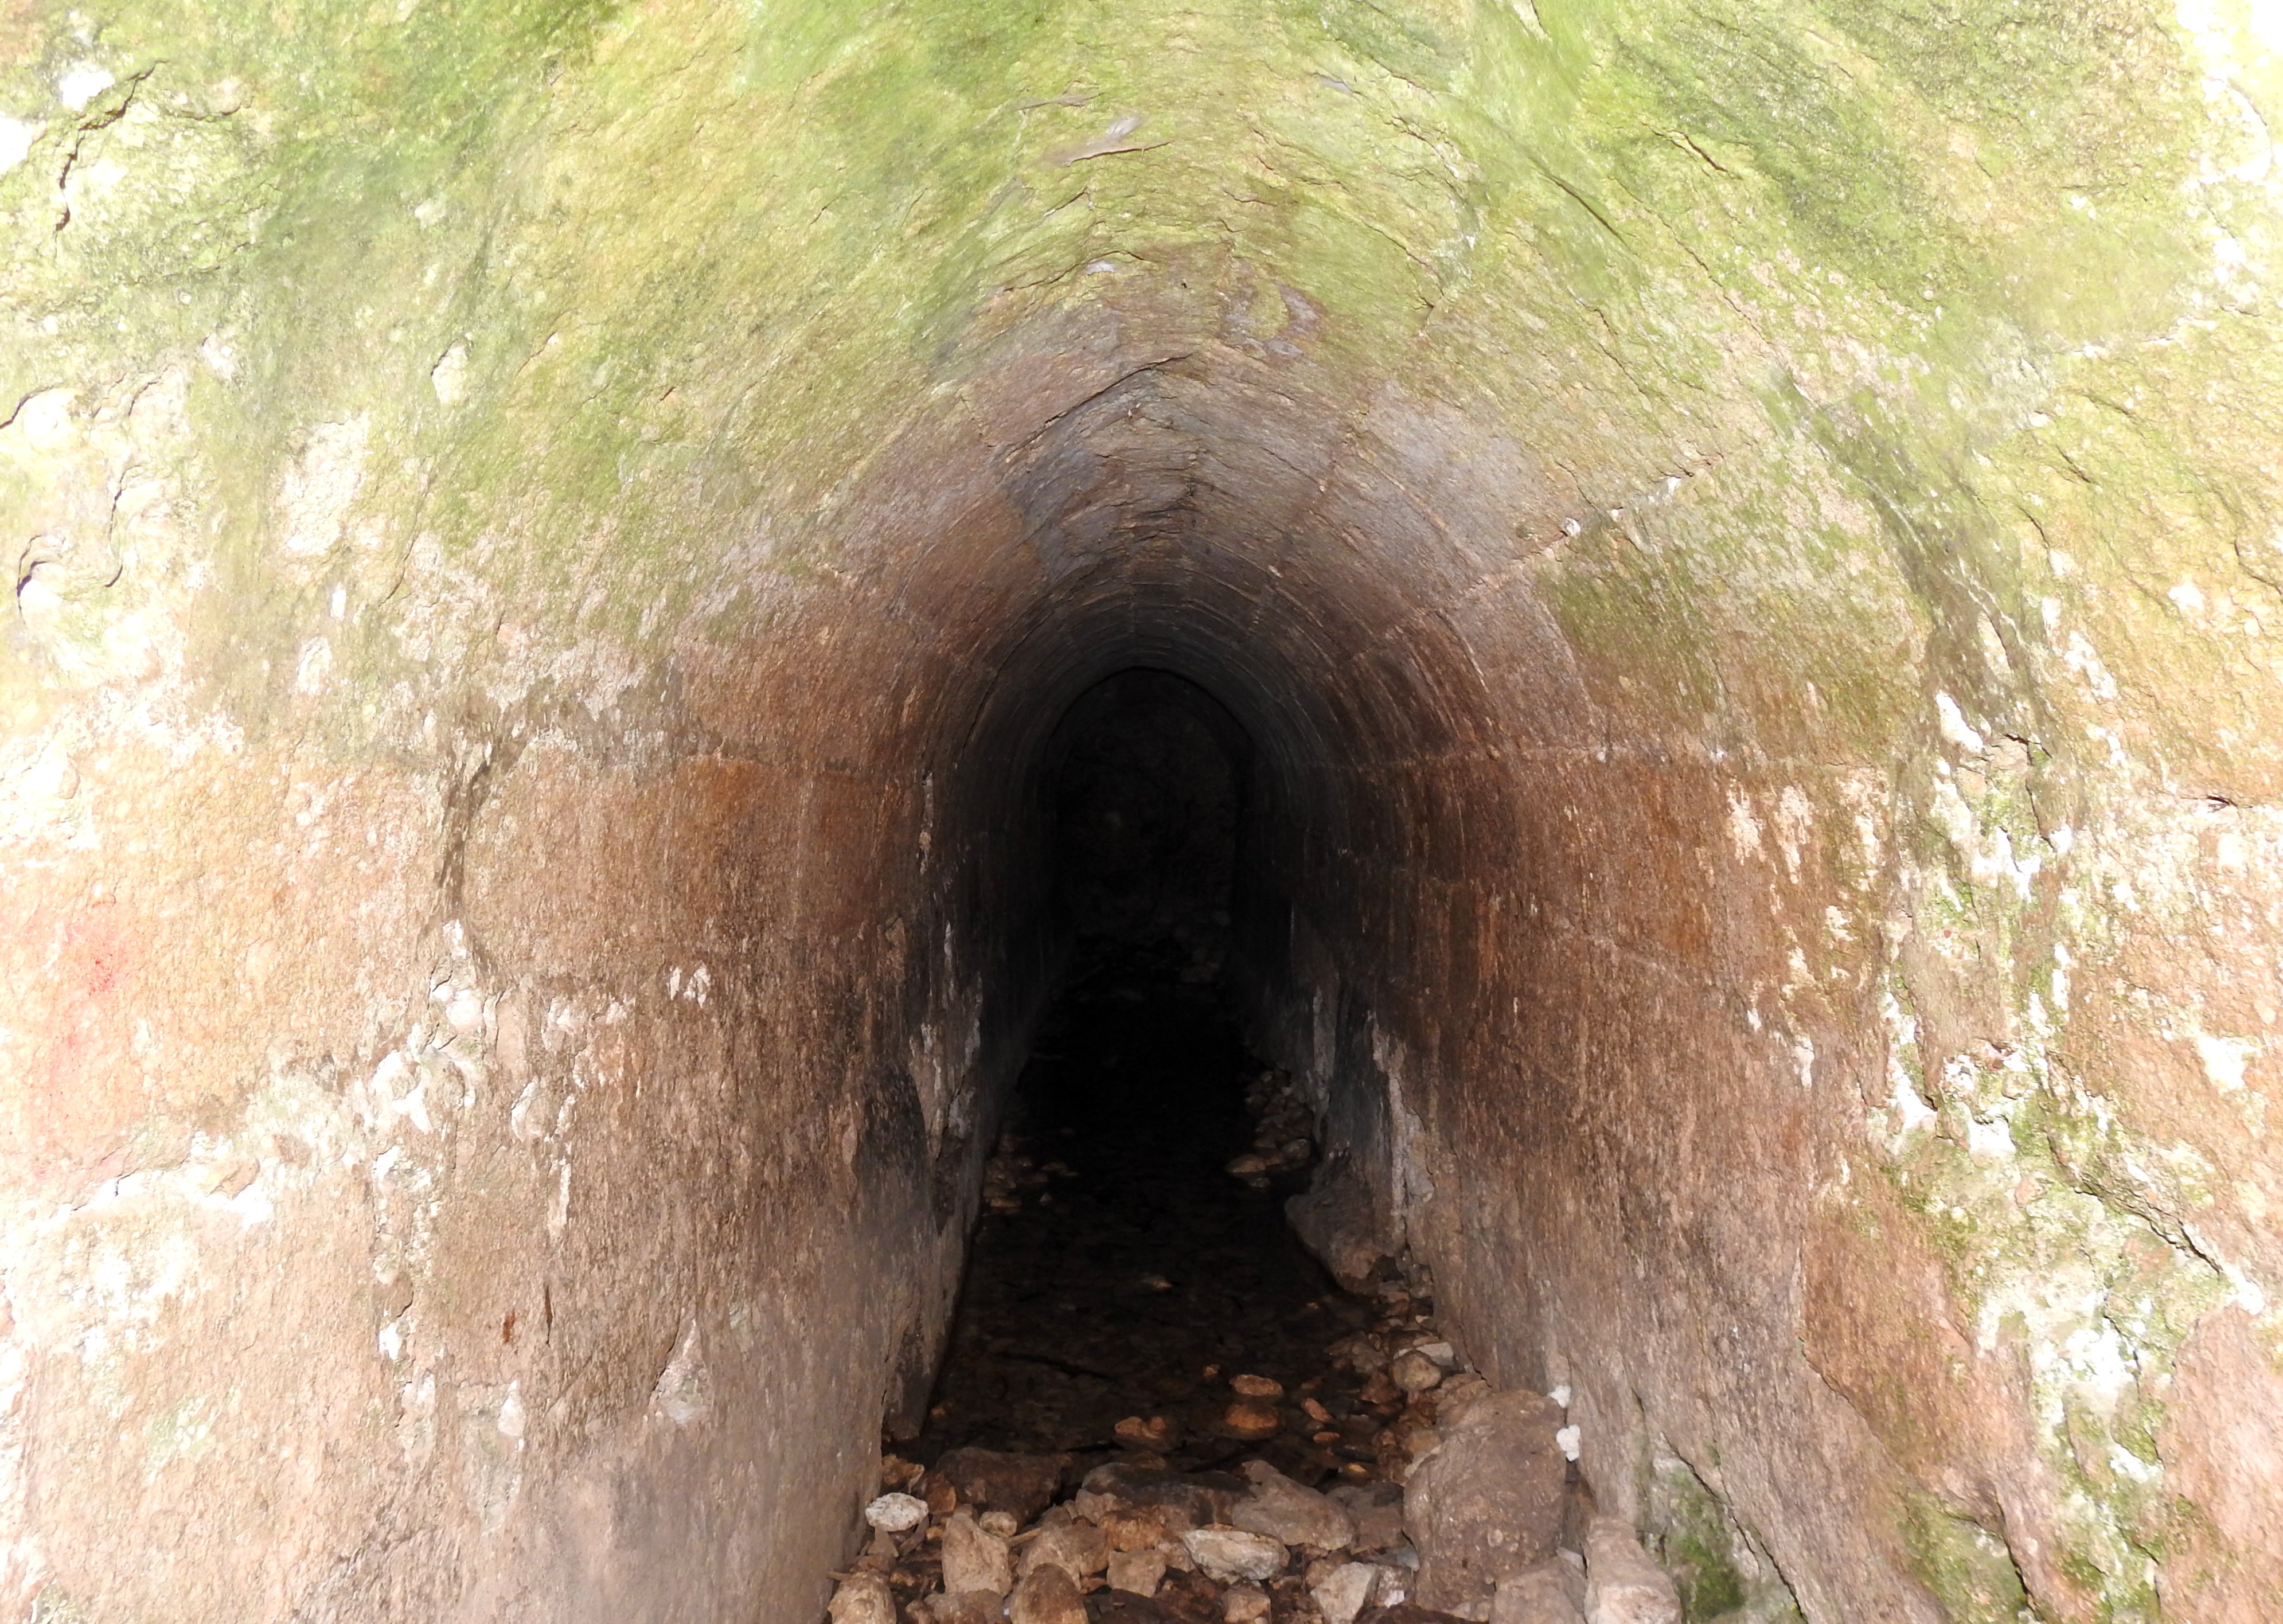 Within Ein Tanur's arched tunnel